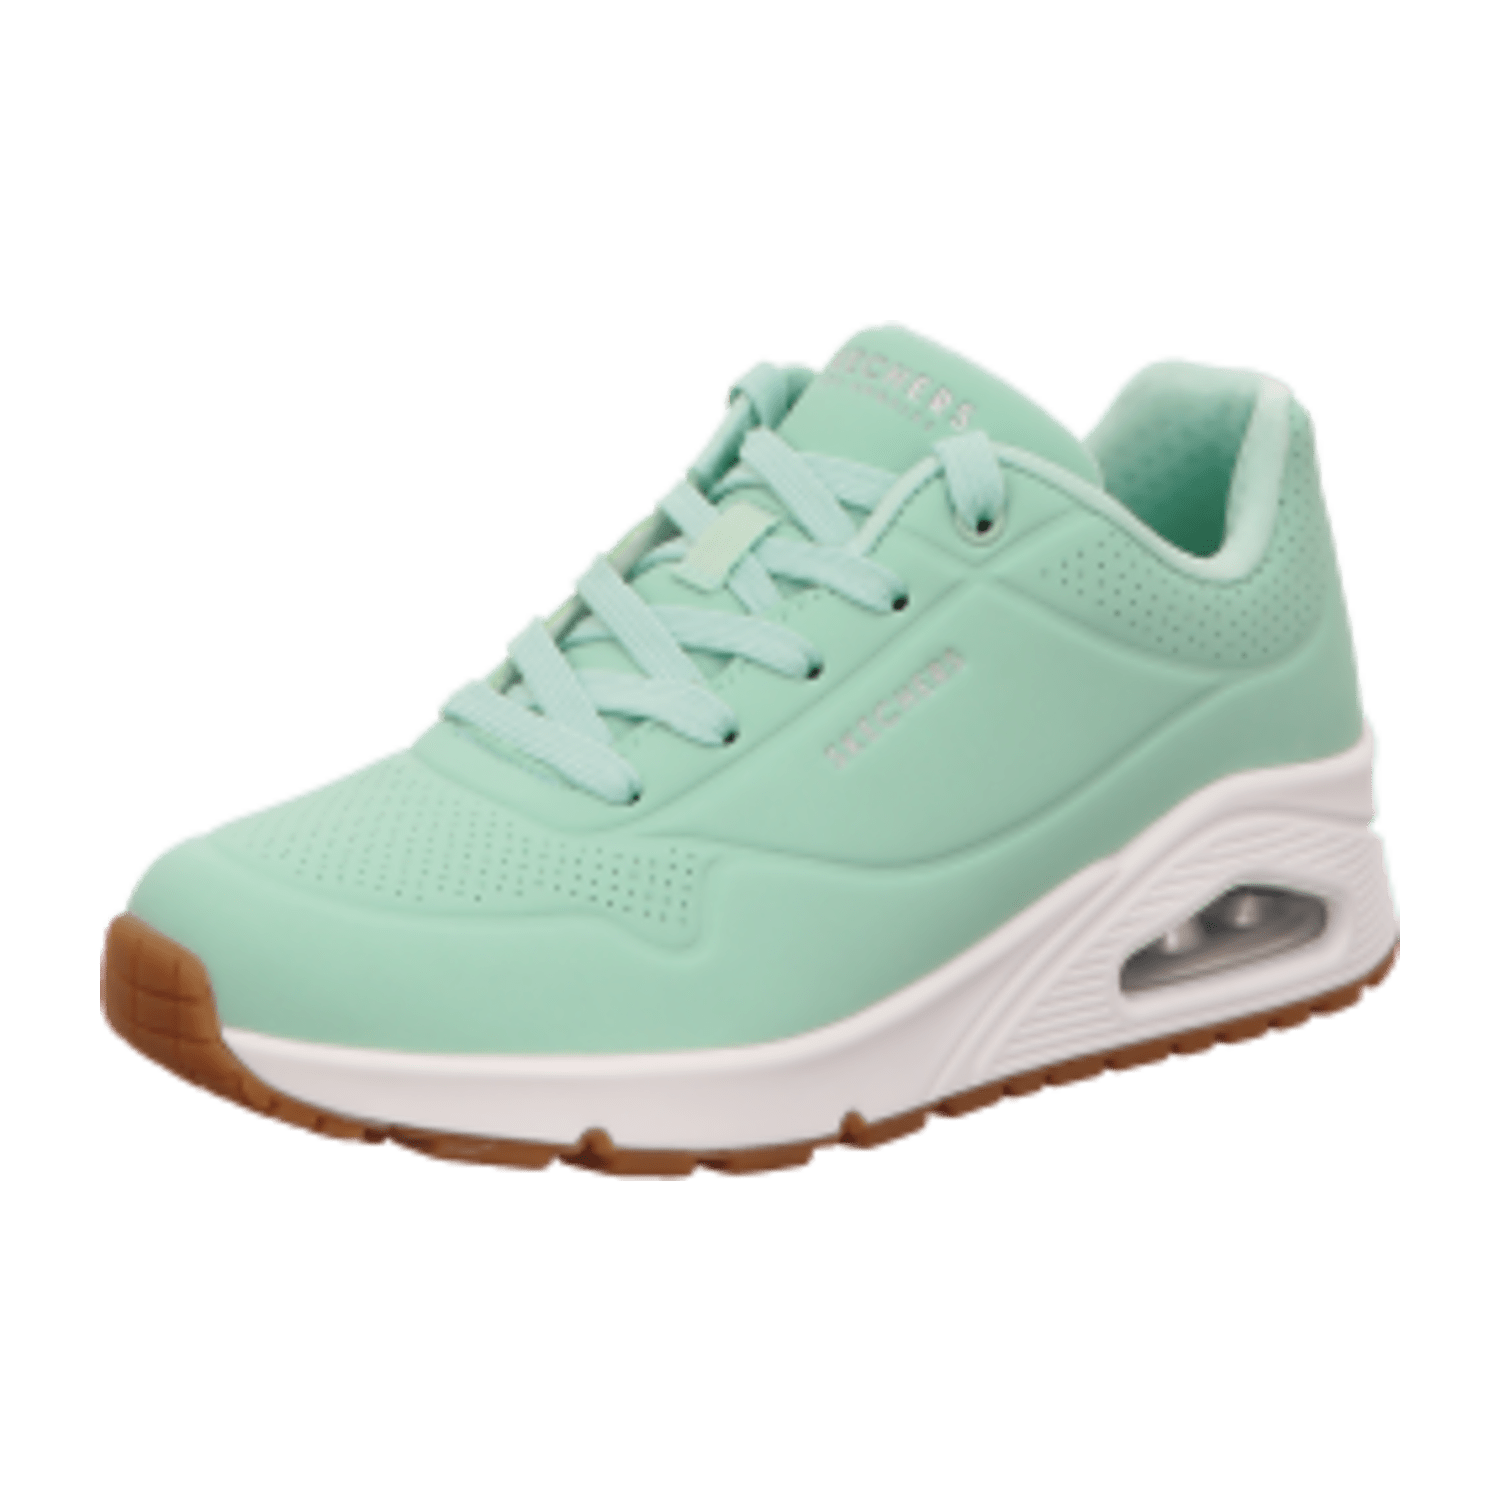 Skechers Fashion Sneaker Stand on Air